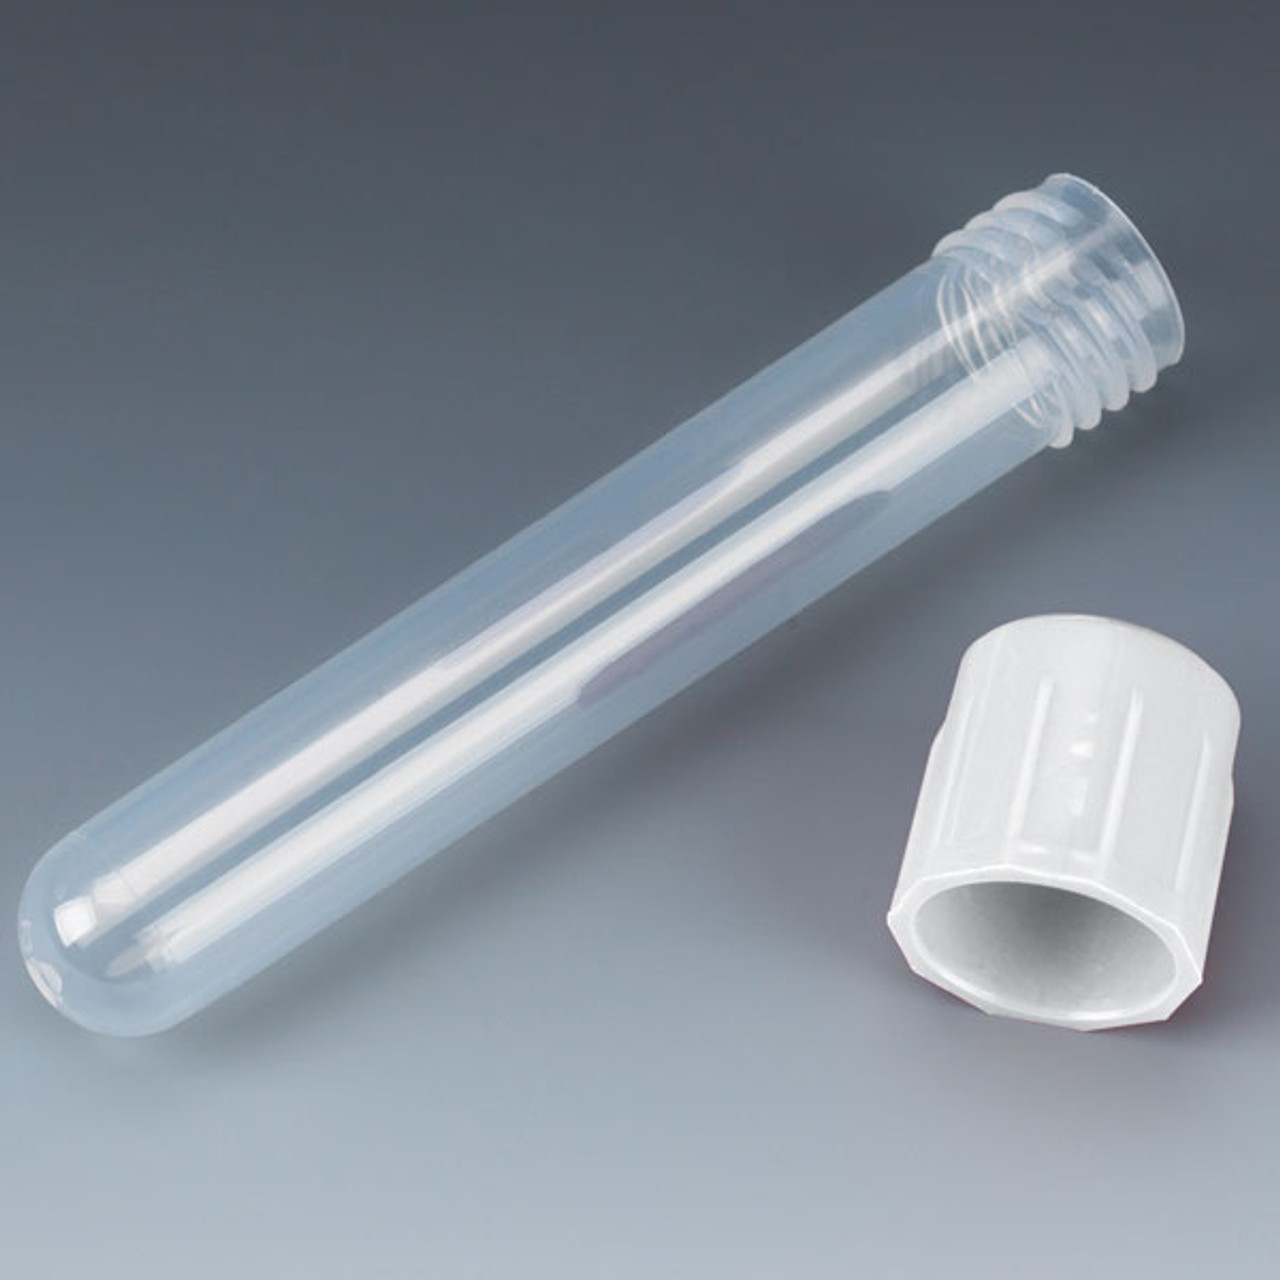 5ml Graduated Plastic Vials, Leak-proof Screw Cap With Frosted